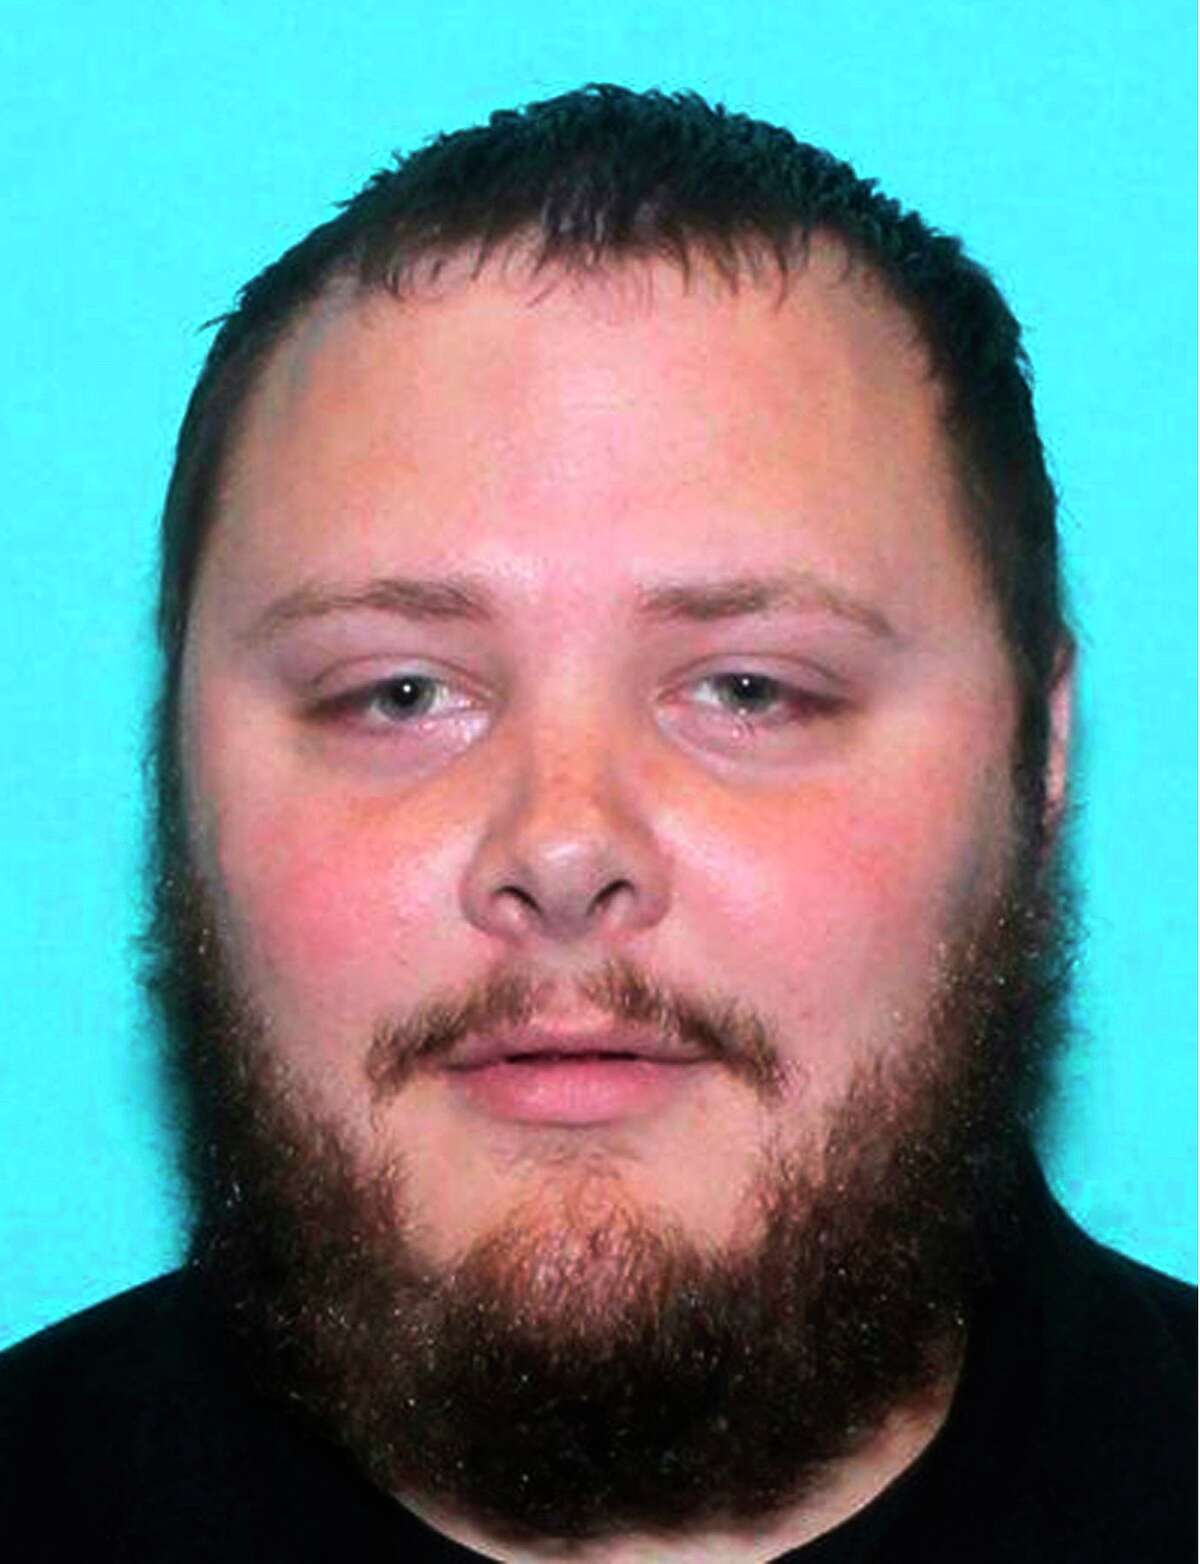 This undated file photo provided by the Texas Department of Public Safety shows Devin Patrick Kelley, the gunman who killed more than two dozen people in Sutherland Springs in 2017. (Texas Department of Public Safety via AP, File)